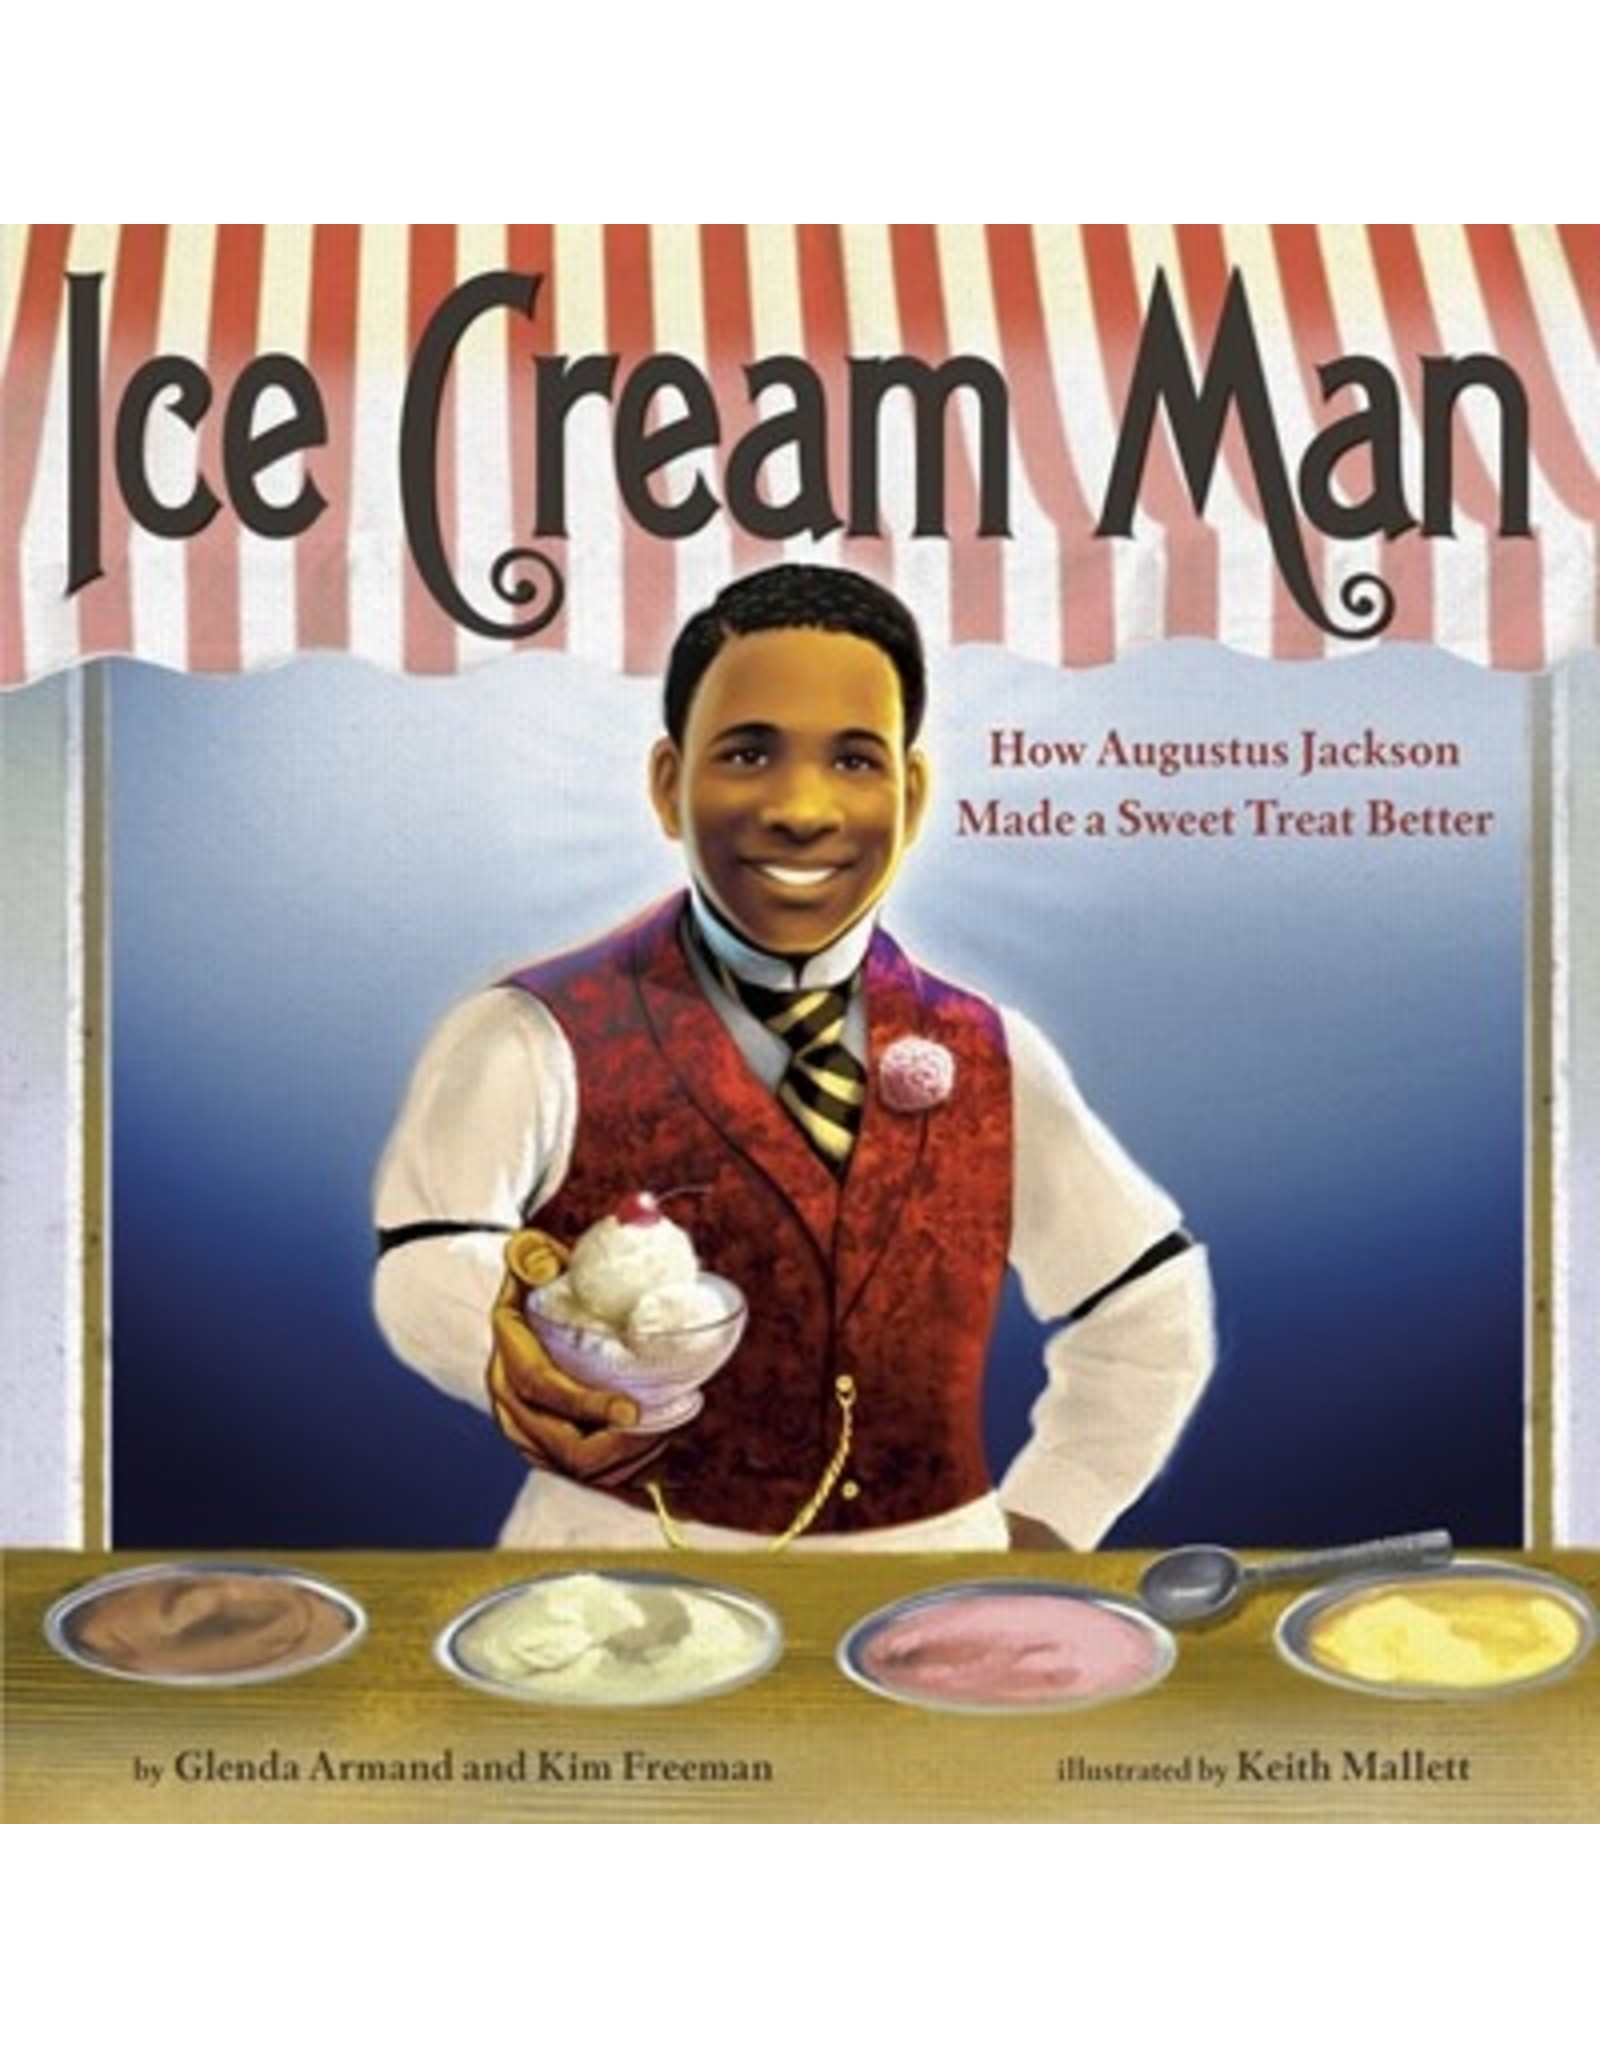 Books Ice Cream Man: How Augustus Jackson Made a Sweet Treat Better by Glenda Armand and Kim Freeman  illustrated by Keith Mallett